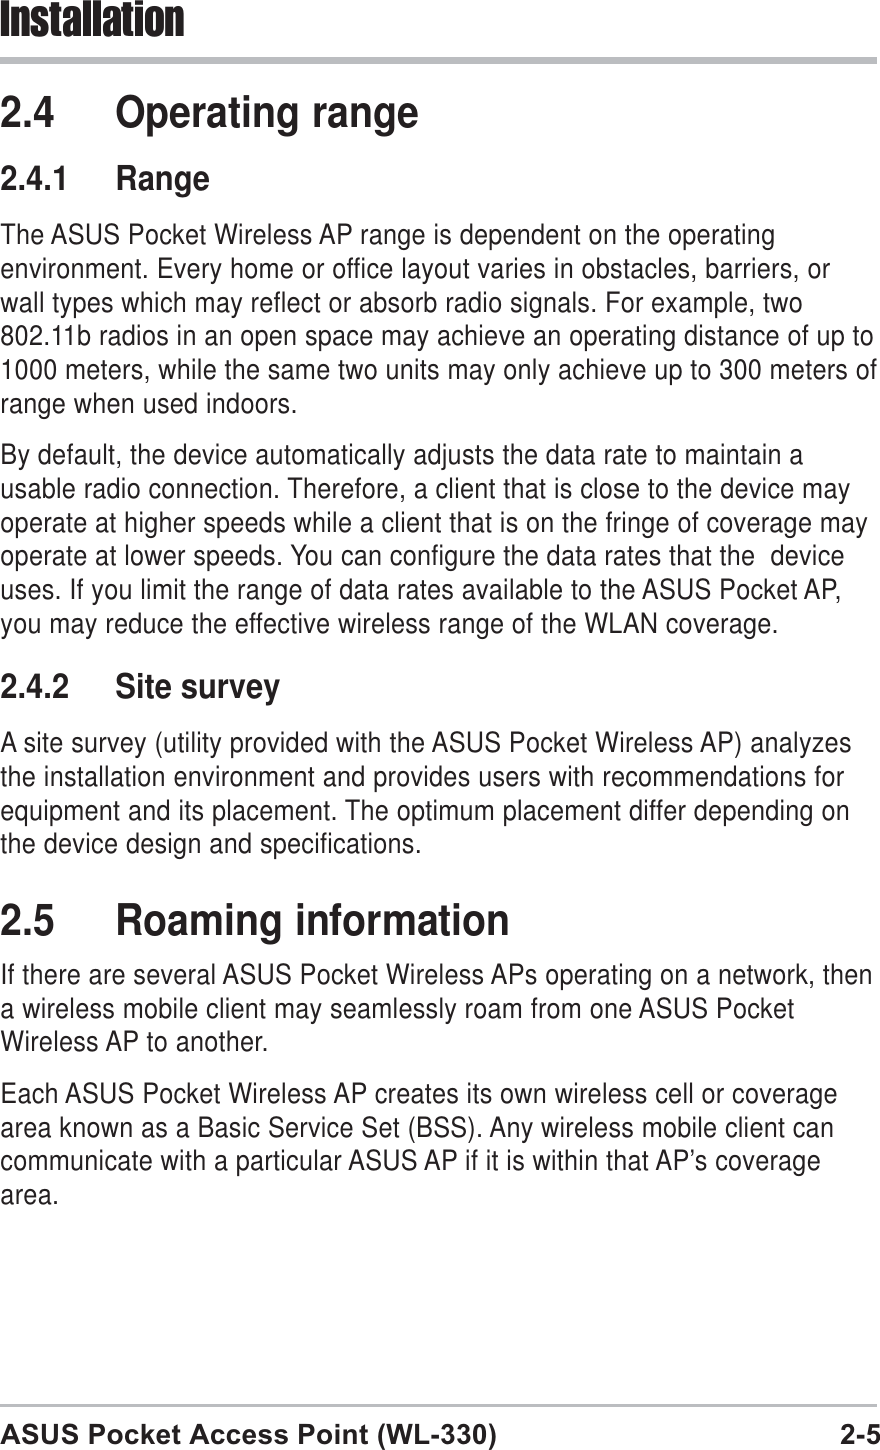 ASUS Pocket Access Point (WL-330) 2-5Installation2.4 Operating range2.4.1 RangeThe ASUS Pocket Wireless AP range is dependent on the operatingenvironment. Every home or office layout varies in obstacles, barriers, orwall types which may reflect or absorb radio signals. For example, two802.11b radios in an open space may achieve an operating distance of up to1000 meters, while the same two units may only achieve up to 300 meters ofrange when used indoors.By default, the device automatically adjusts the data rate to maintain ausable radio connection. Therefore, a client that is close to the device mayoperate at higher speeds while a client that is on the fringe of coverage mayoperate at lower speeds. You can configure the data rates that the  deviceuses. If you limit the range of data rates available to the ASUS Pocket AP,you may reduce the effective wireless range of the WLAN coverage.2.4.2 Site surveyA site survey (utility provided with the ASUS Pocket Wireless AP) analyzesthe installation environment and provides users with recommendations forequipment and its placement. The optimum placement differ depending onthe device design and specifications.2.5 Roaming informationIf there are several ASUS Pocket Wireless APs operating on a network, thena wireless mobile client may seamlessly roam from one ASUS PocketWireless AP to another.Each ASUS Pocket Wireless AP creates its own wireless cell or coveragearea known as a Basic Service Set (BSS). Any wireless mobile client cancommunicate with a particular ASUS AP if it is within that AP’s coveragearea.